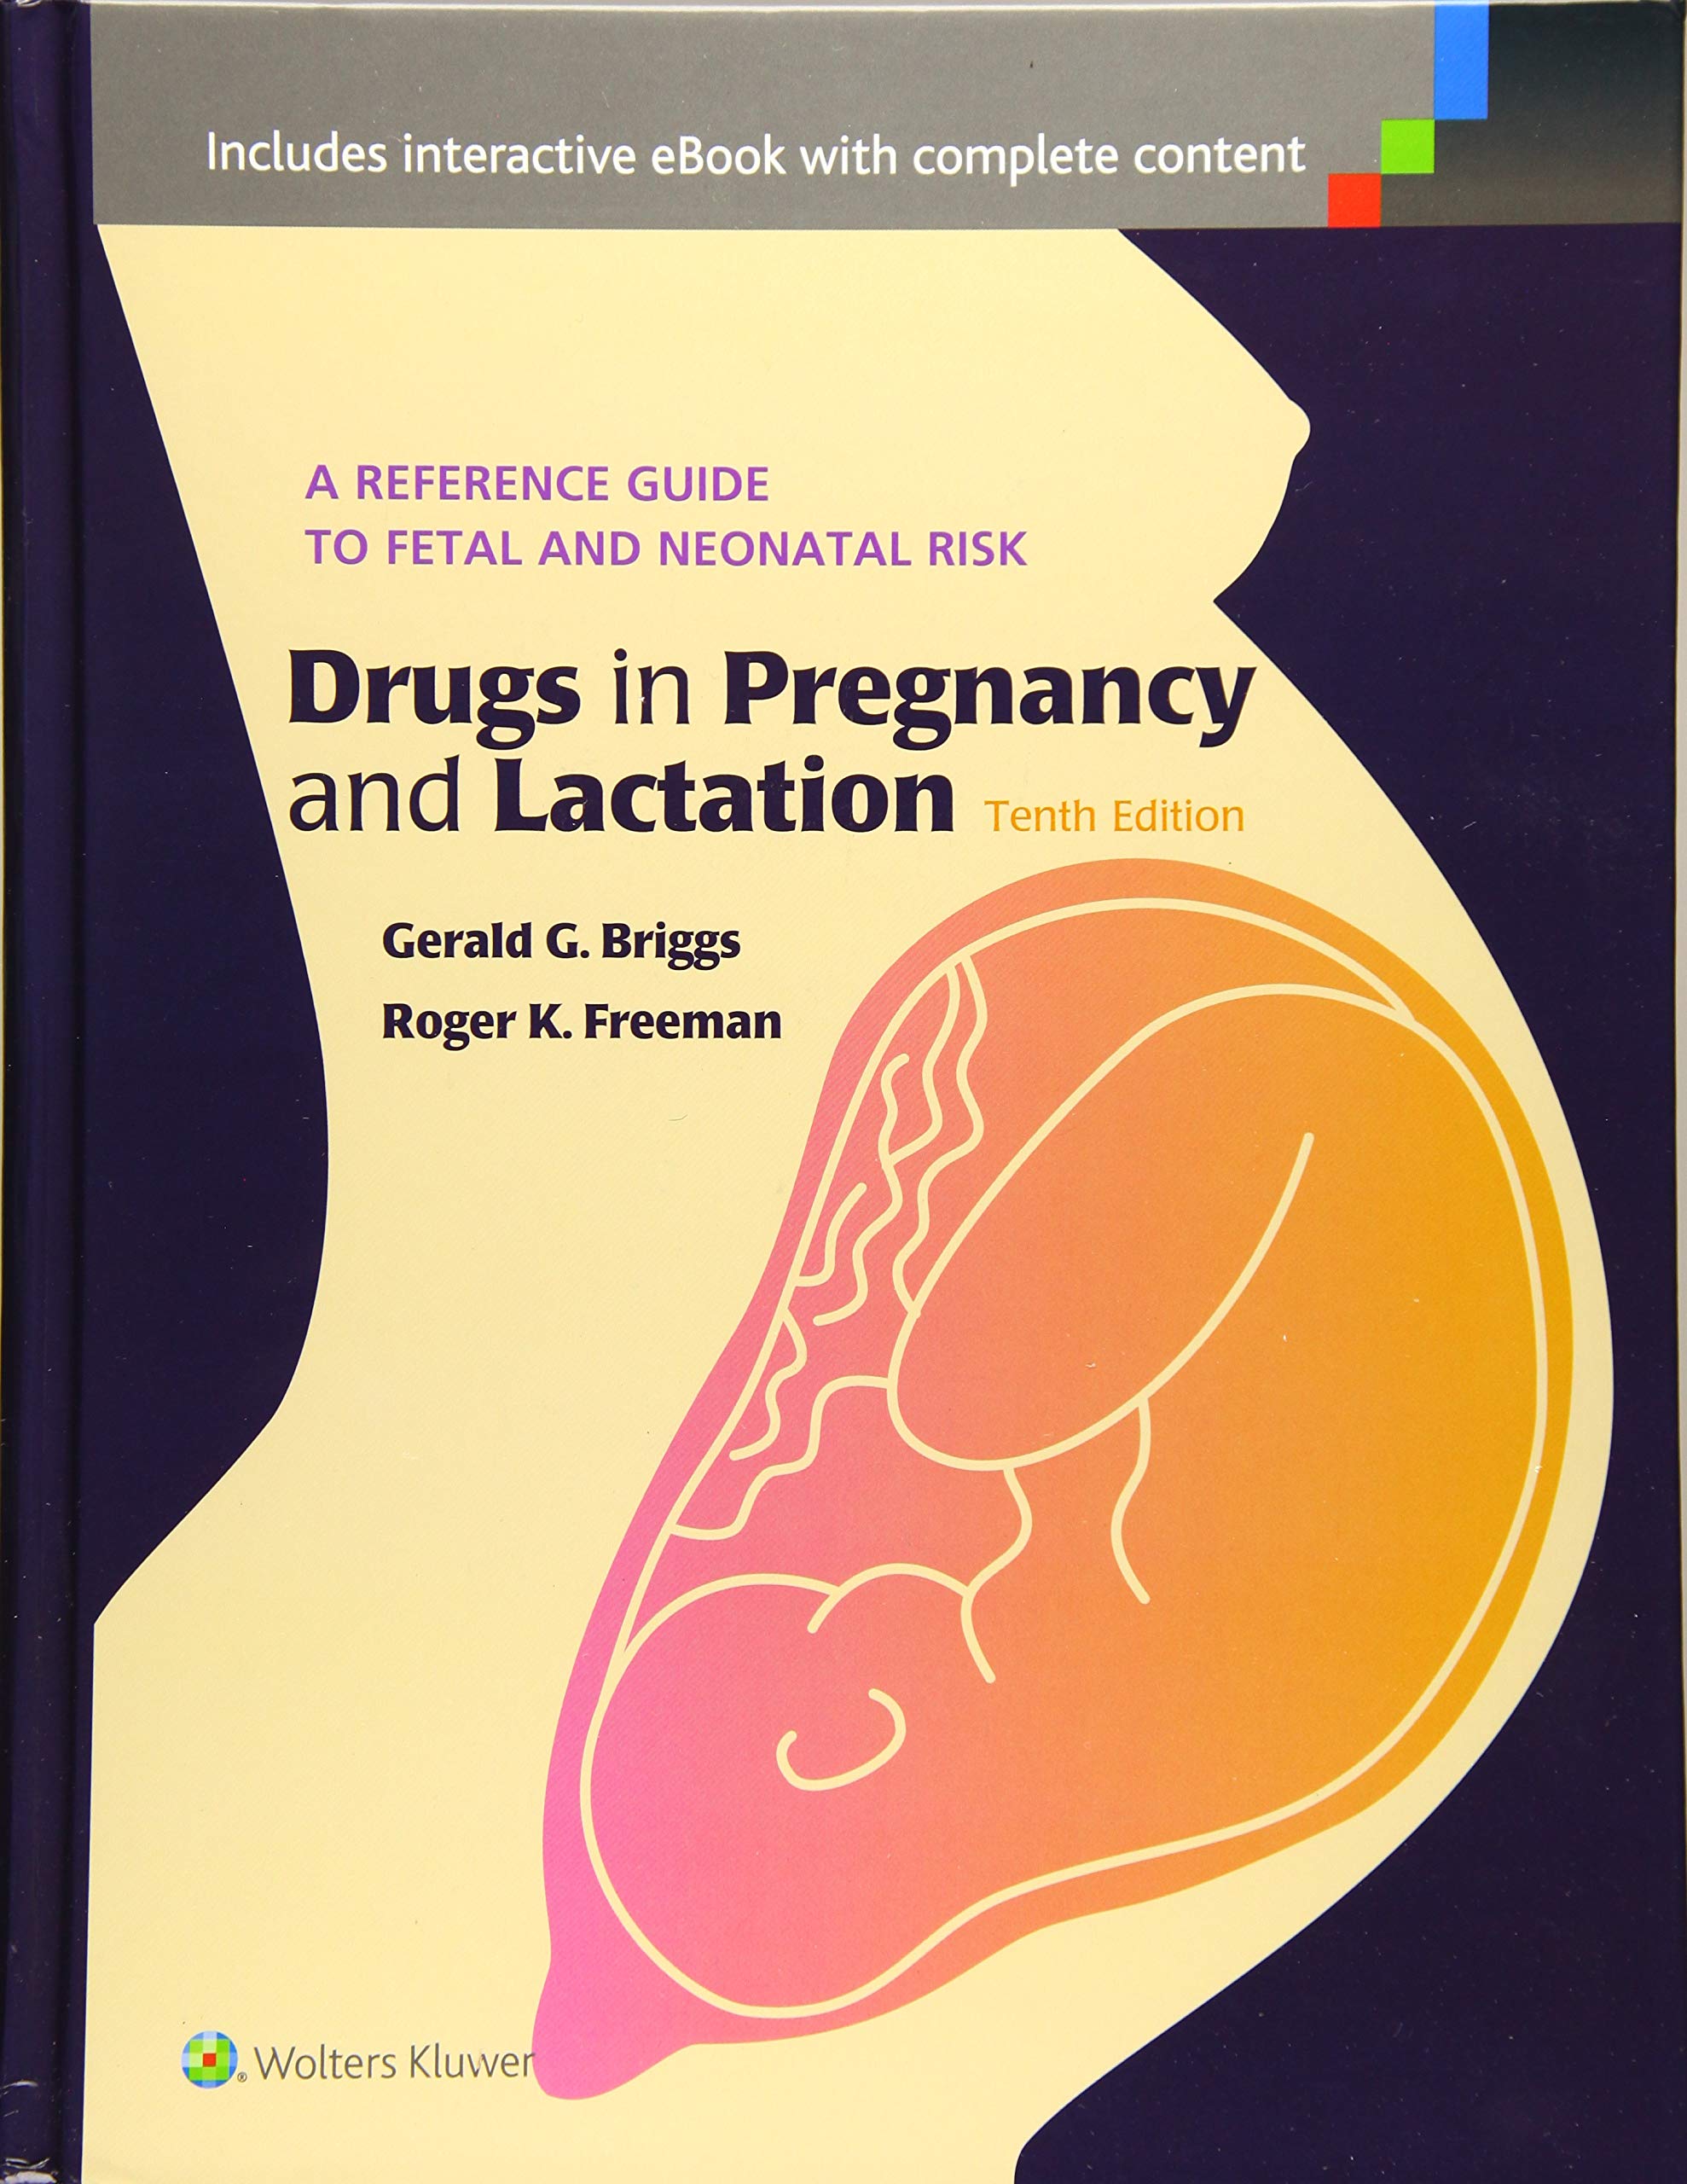 Drugs In Pregnancy And Lactation A Reference Guide To Fetal And Neonatal Risk 10Ed (Hb 2015) (OLD Edition)